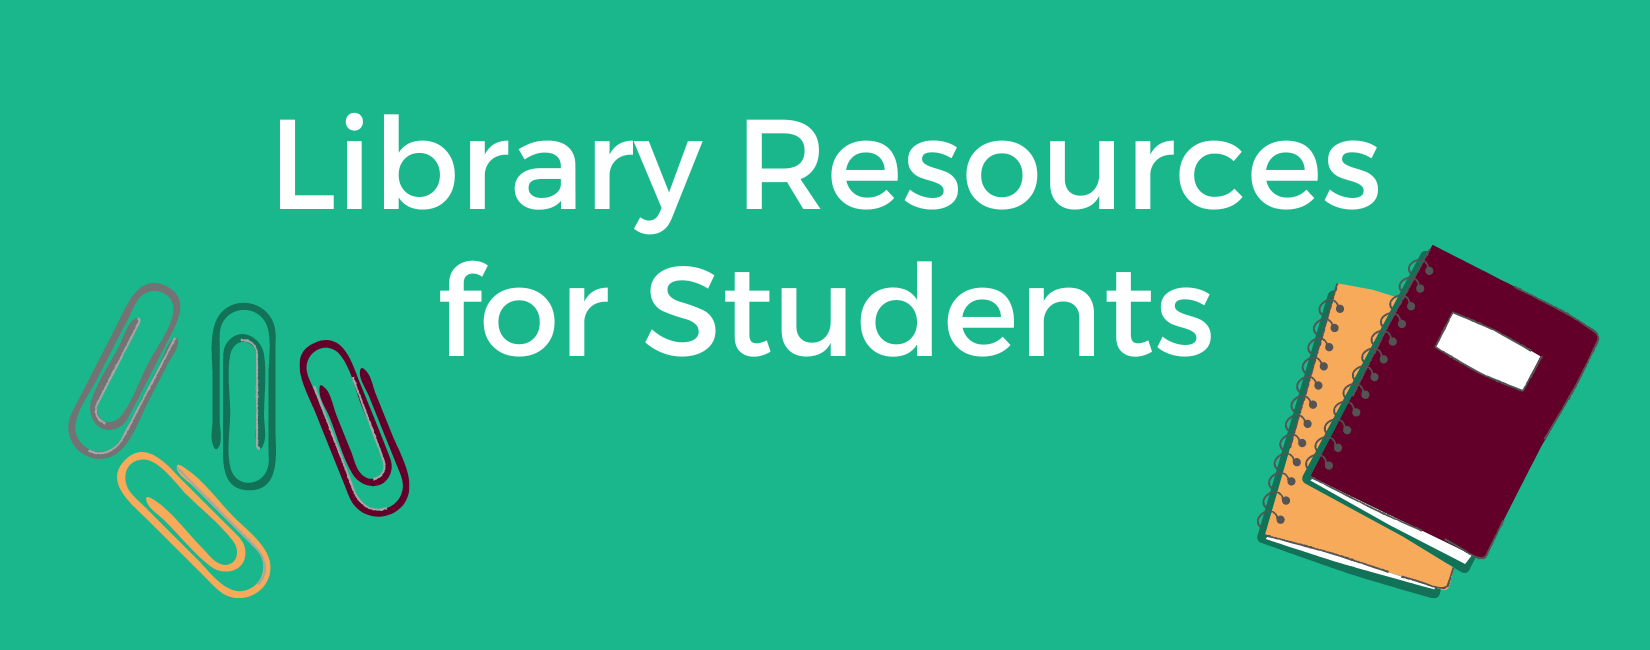 Library Resources for Students